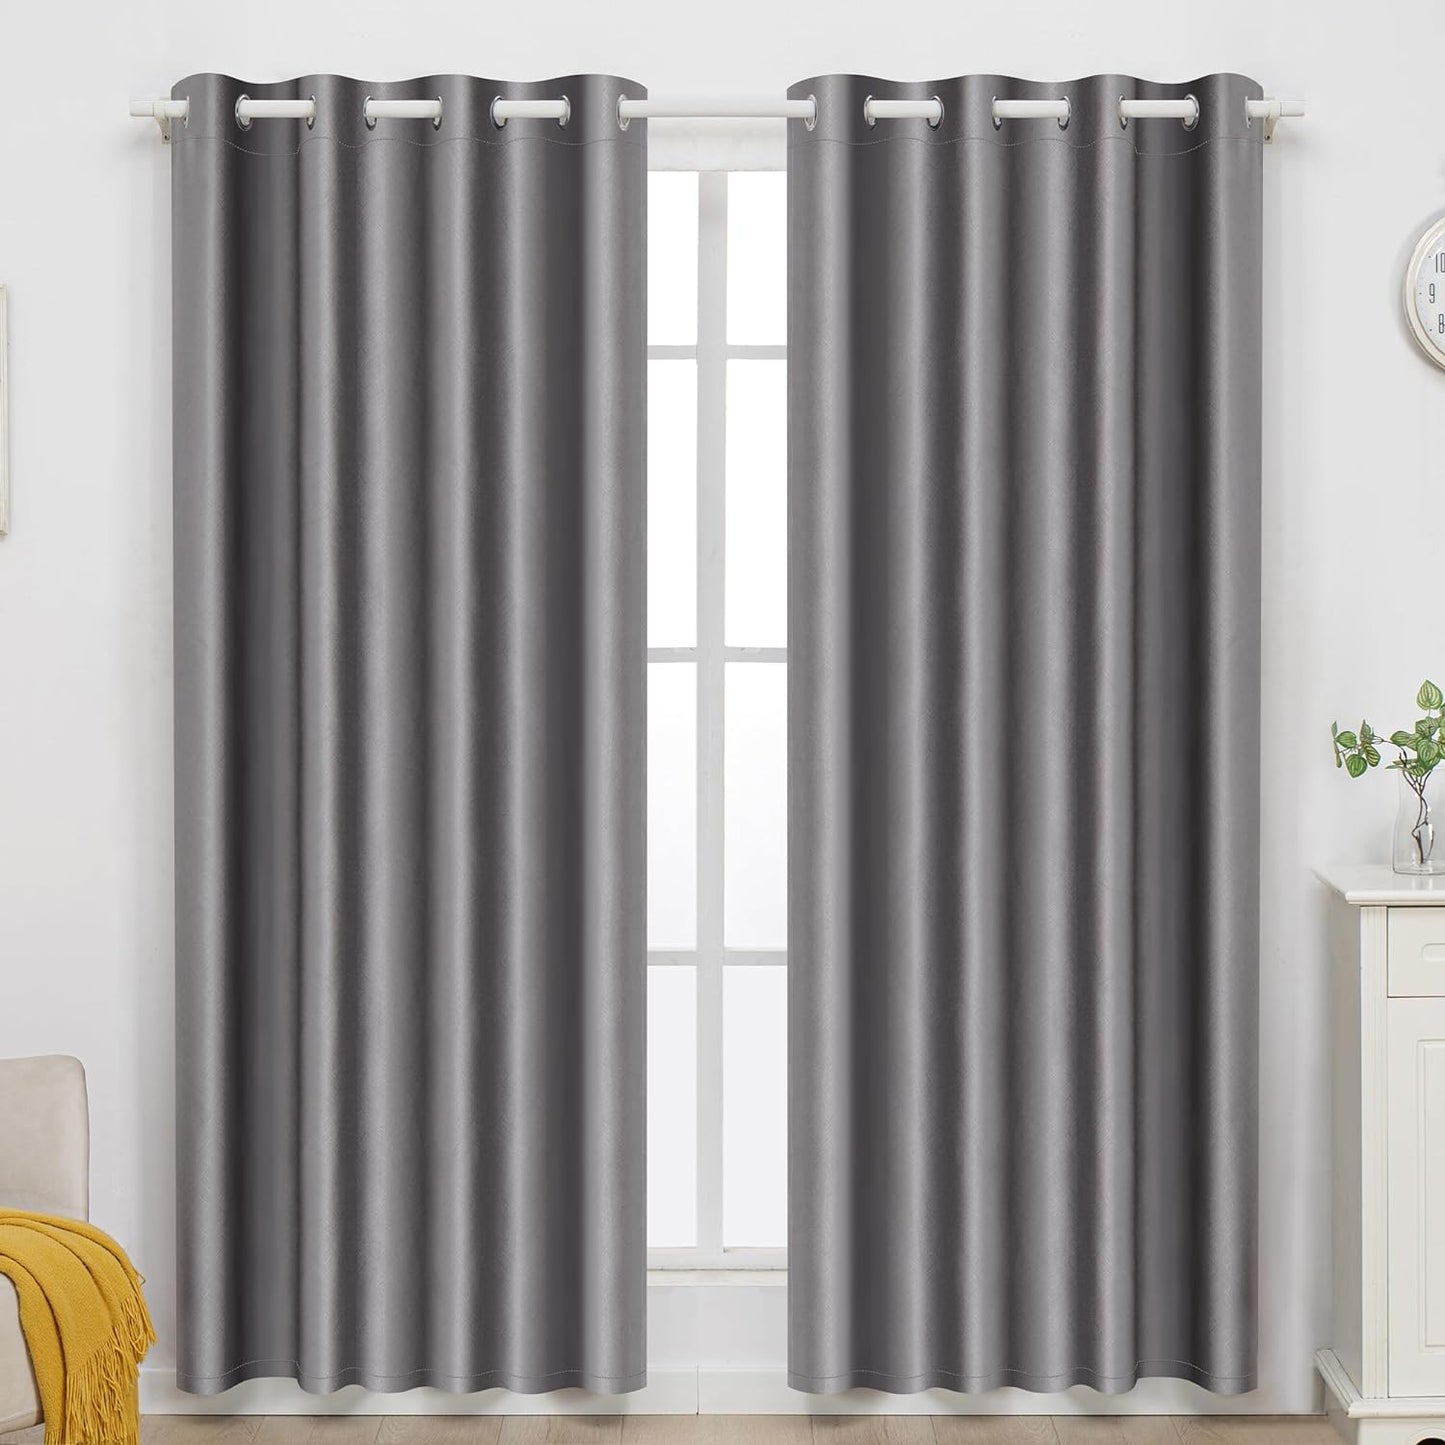 Silver 100% Blackout Curtains for Bedroom, 3 Thick Layers Thermal Insulated Black Out Window Curtains, Full Room Darkening Noise Reducing Grommet Curtains with Black Liner (52 X 84 Inch, 2 Panels)  CZL Grey 52"W X 84"H 